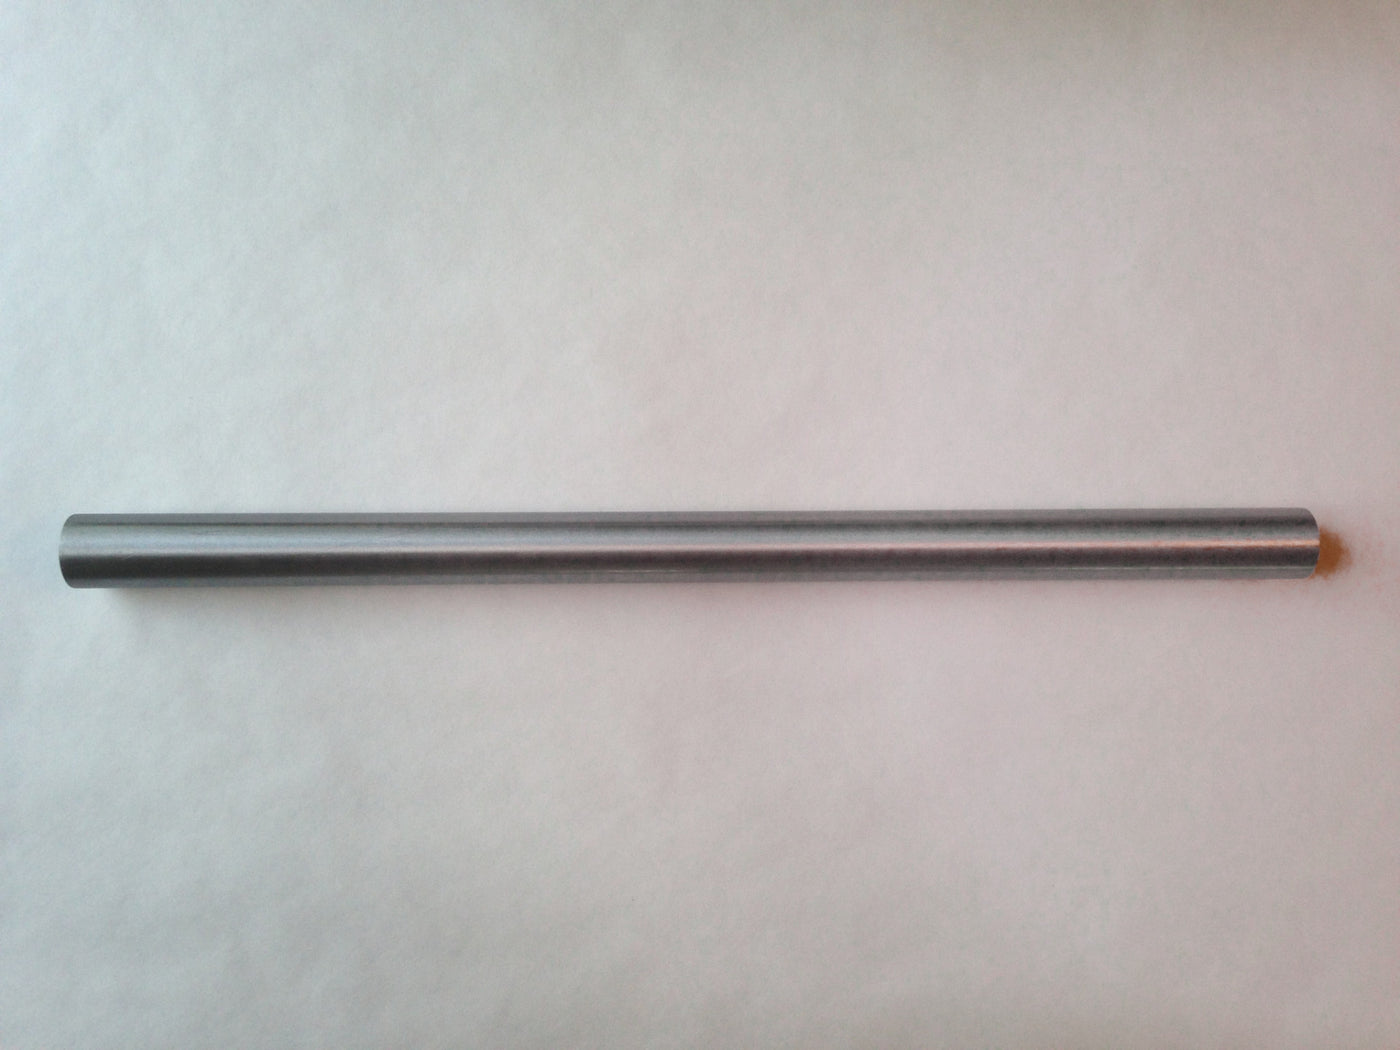 Columbus Zona headtube - 36 dia. - 1.1mm wall - length = 600 for bicycle frame building